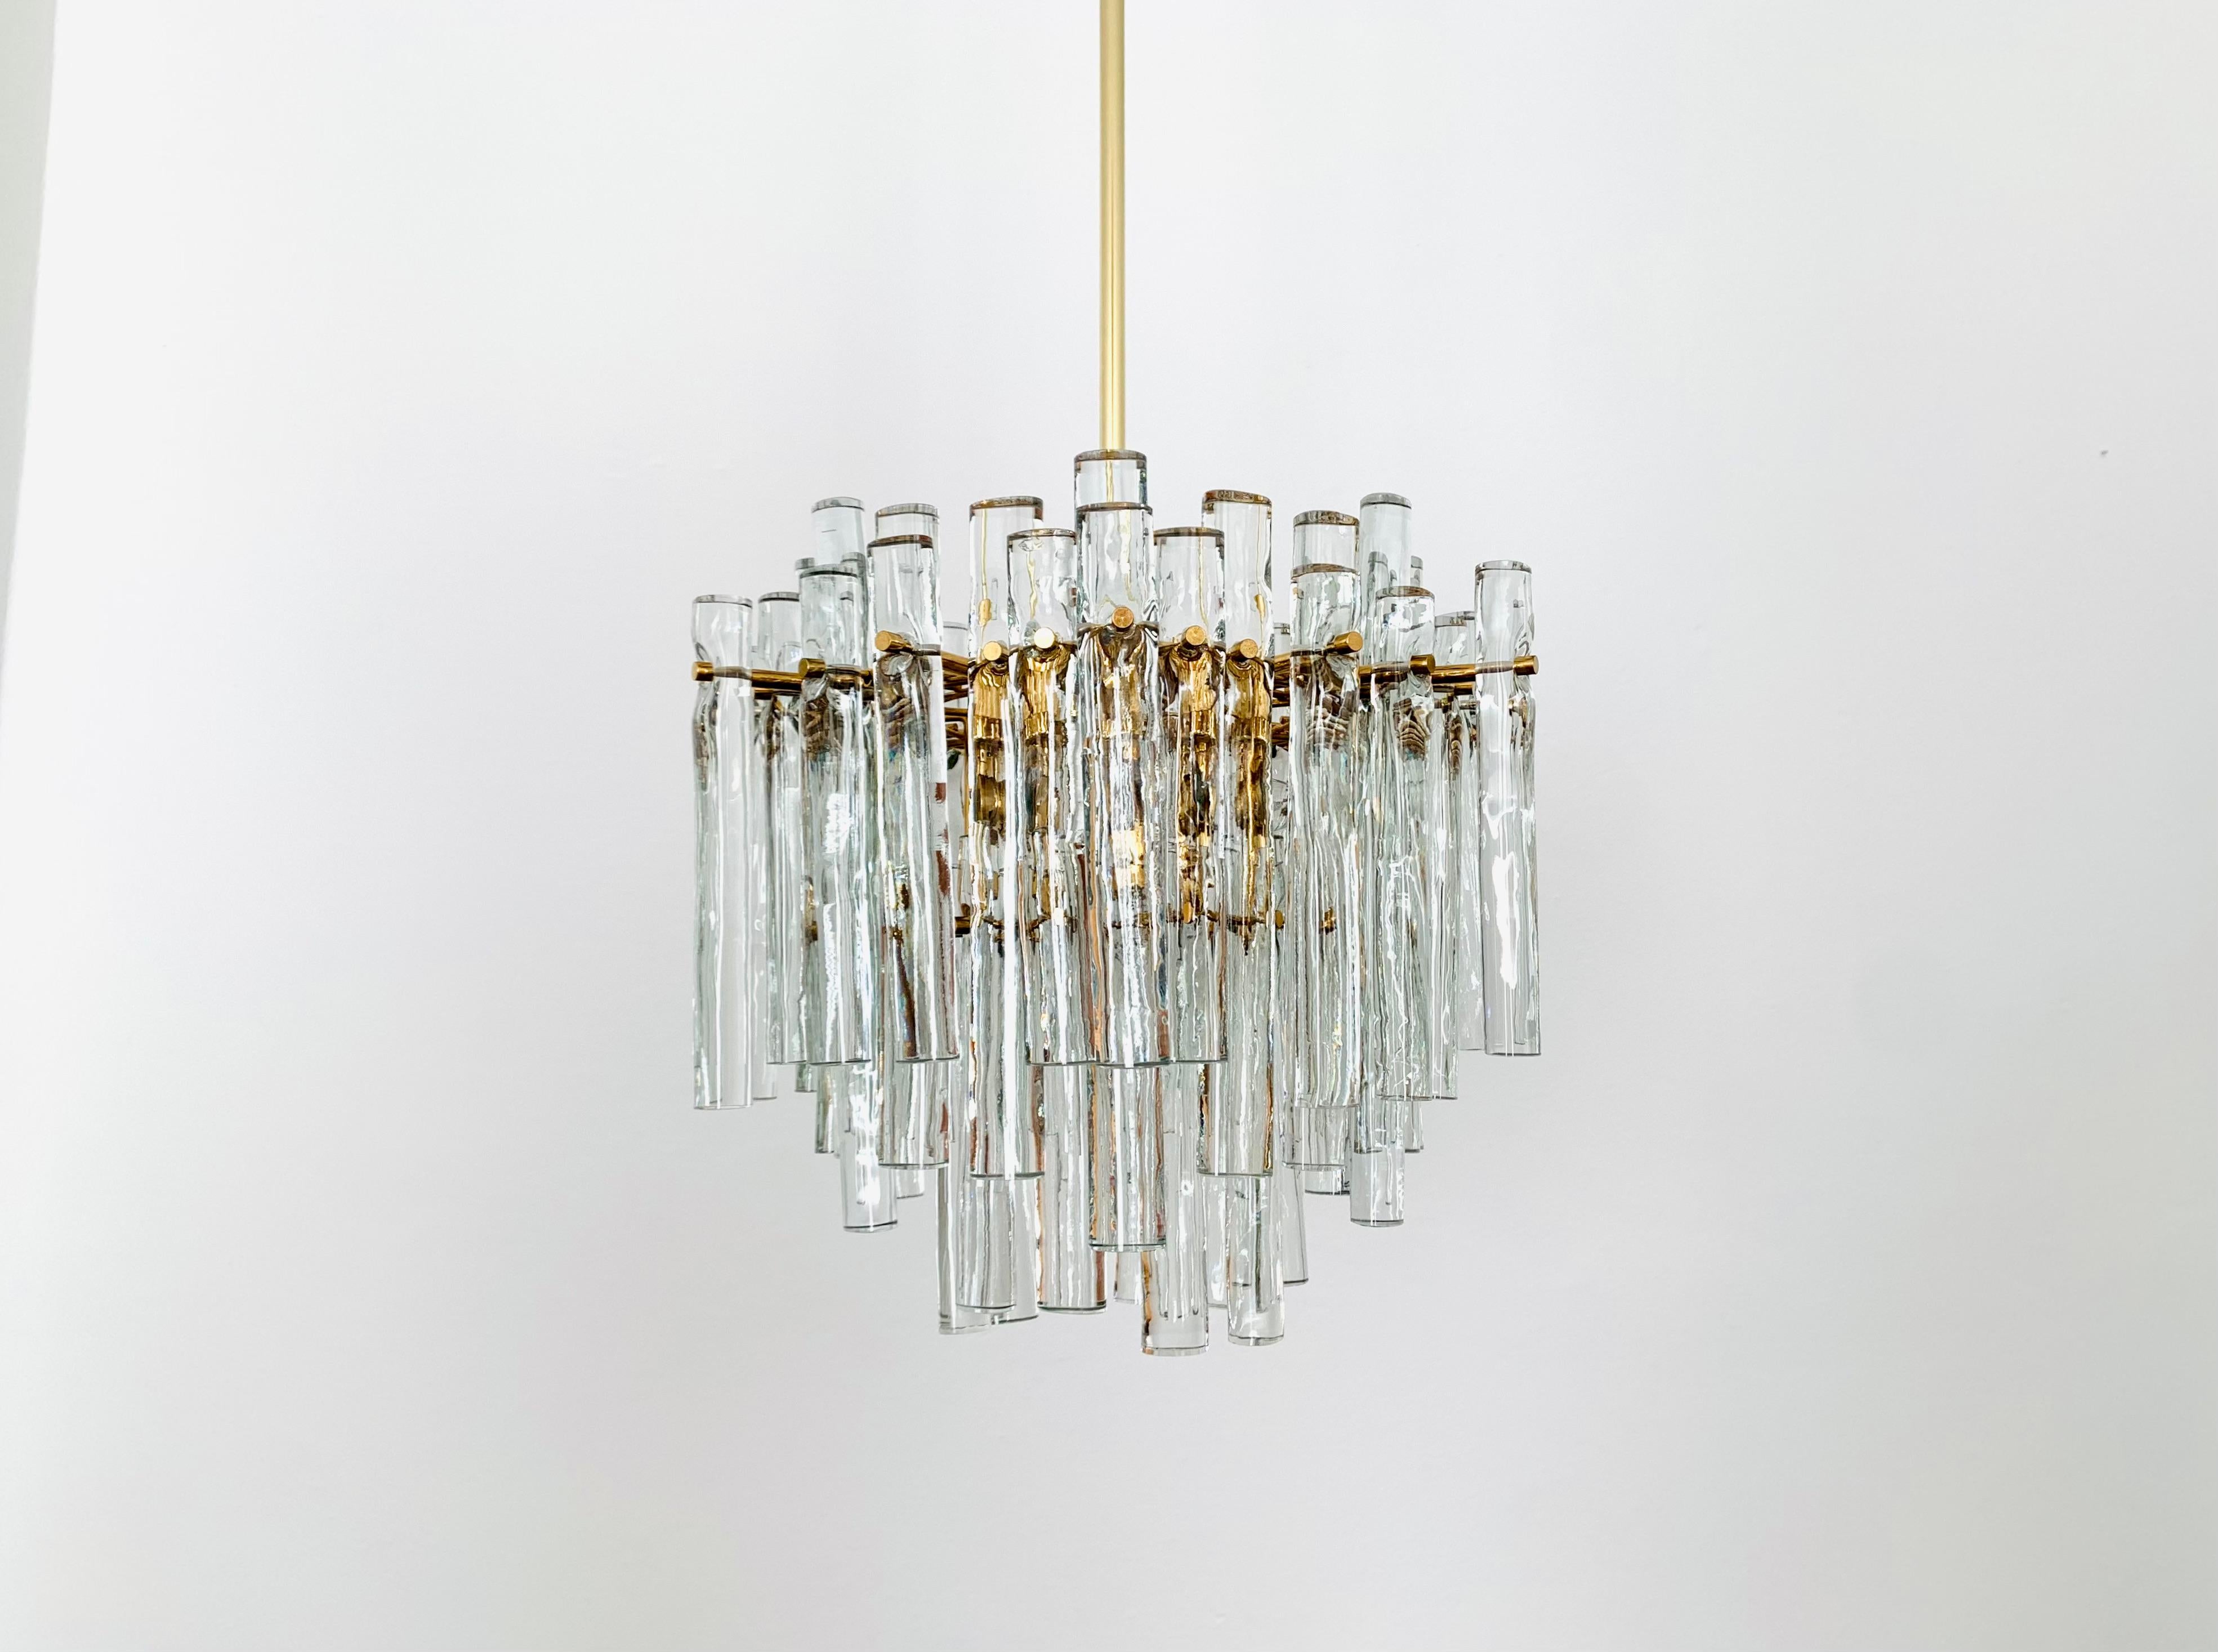 Extremely beautiful chandelier from the 1960s.
The high-quality workmanship and the very noble material impress at first sight.
Exceptionally beautiful design.
The lamp spreads a fantastic play of light in the room.

Manufacturer: